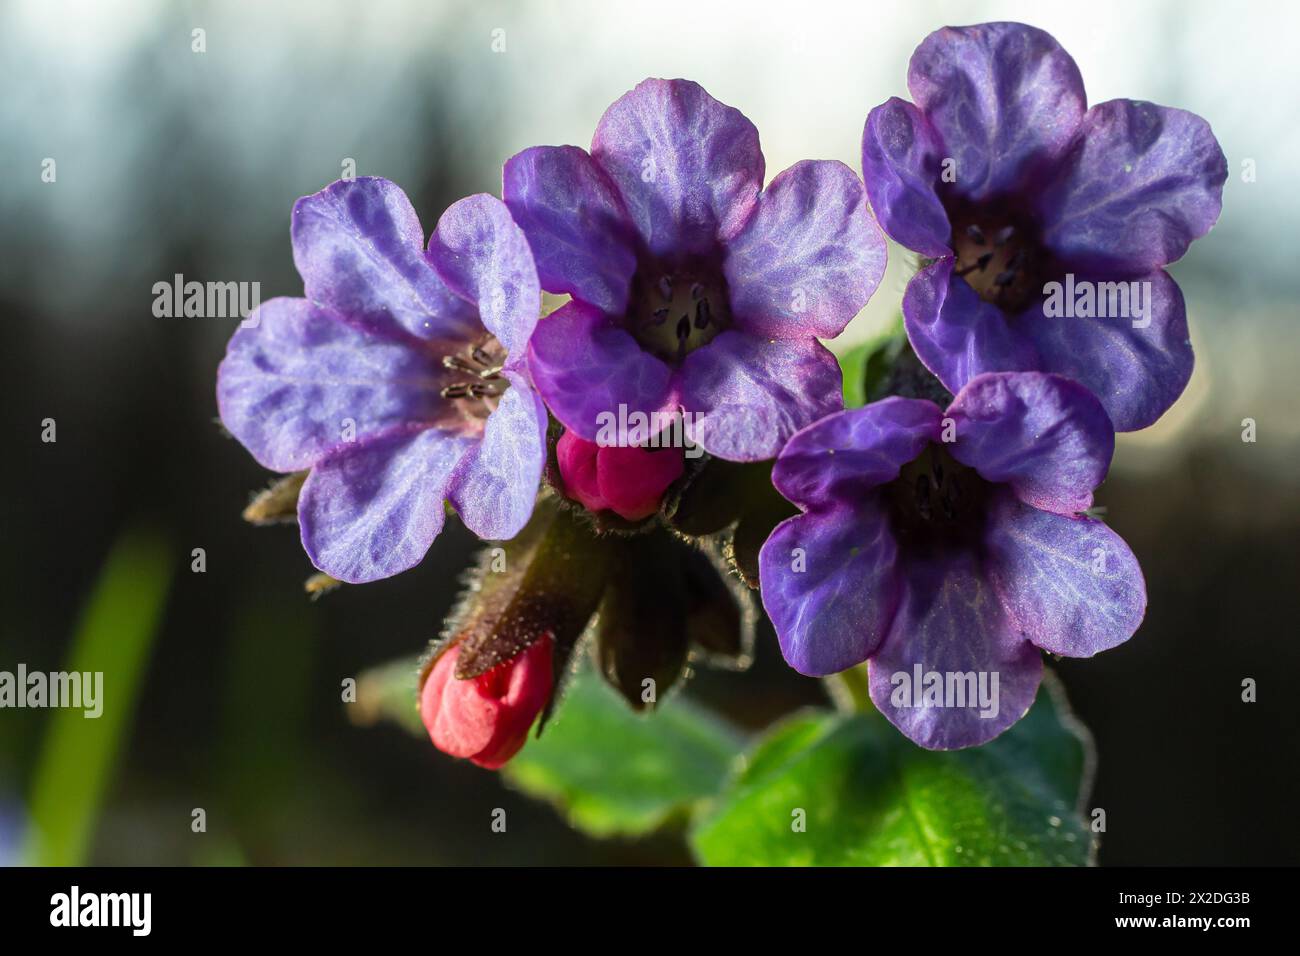 Vivid and bright pulmonaria flowers on green leaves background close up. Stock Photo